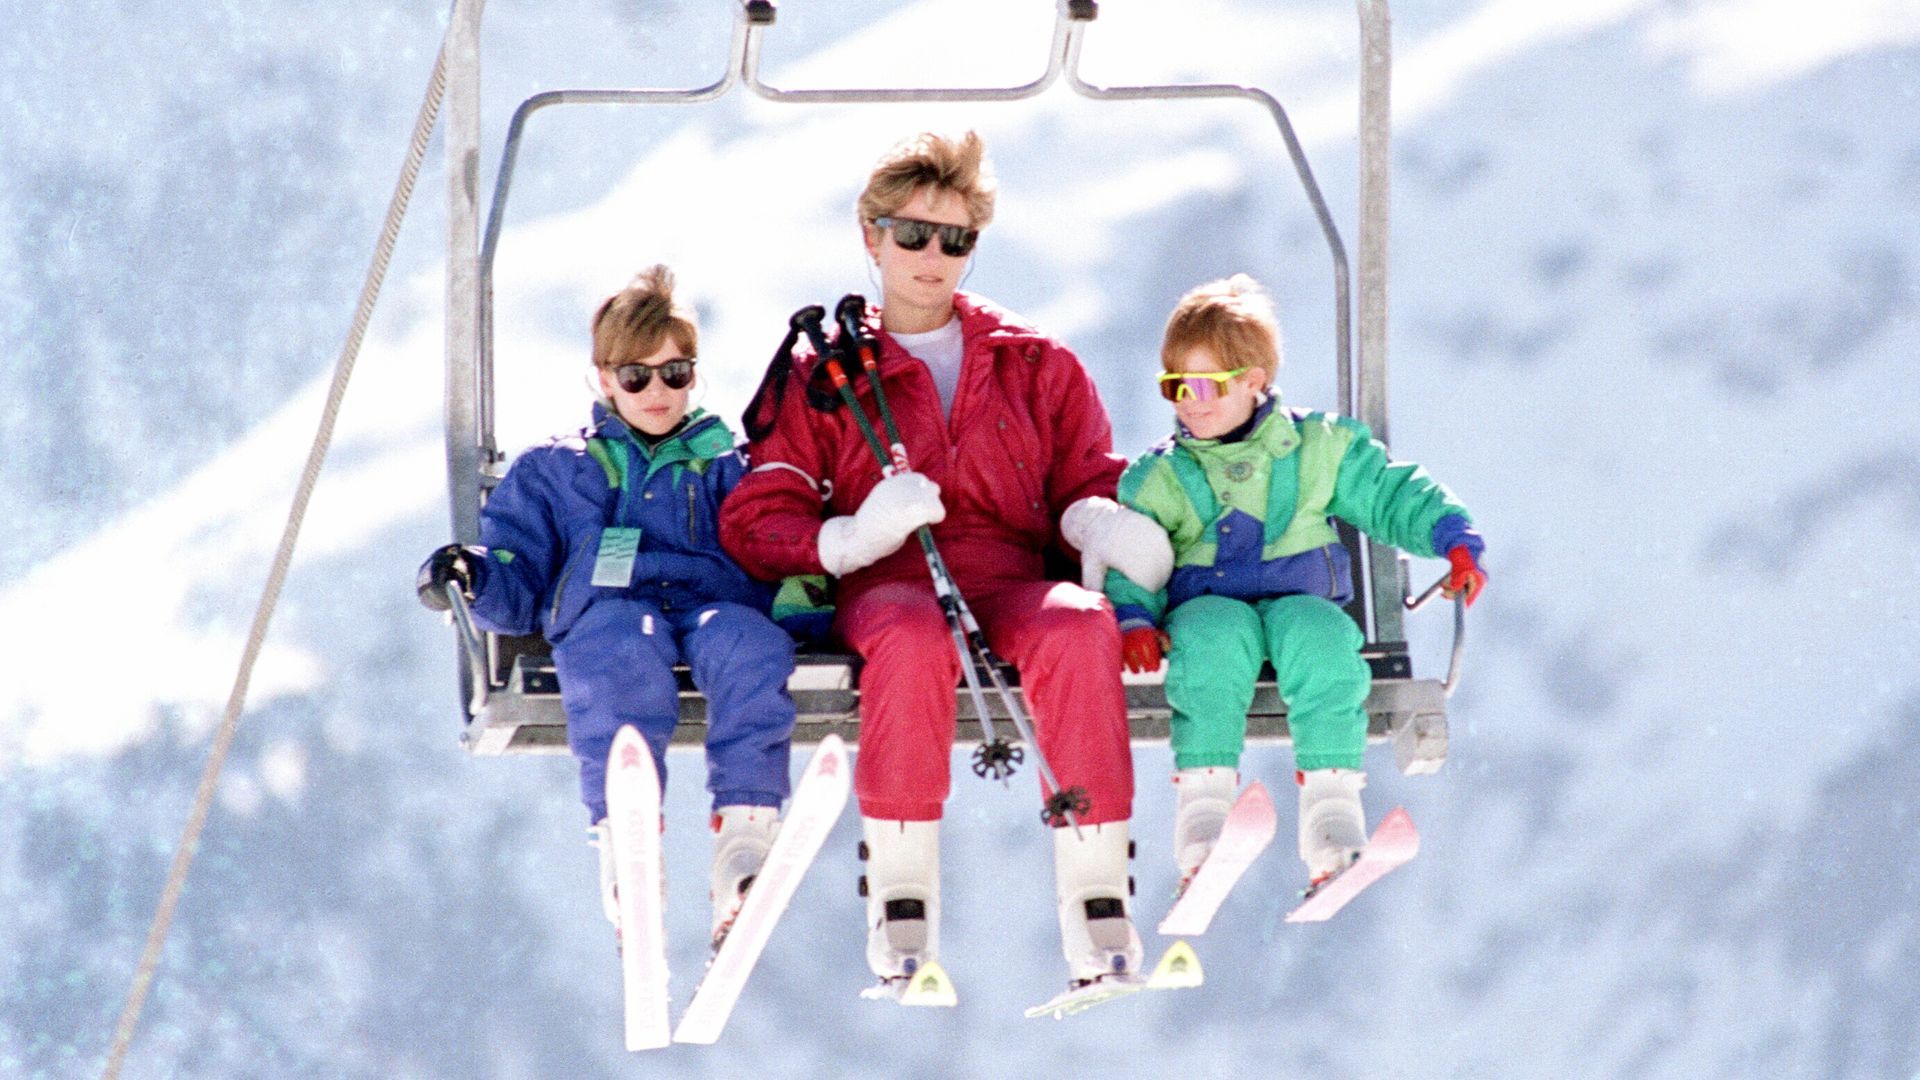 <p>                     This skiing hotspot is not only Diana’s but also one of the royal family’s favourite holiday destinations. Diana frequented the alpine village numerous times throughout the 90s, often opting for Hotel Arlberg as her lodgings of choice. Diana loved to ski alongside William and Harry, and in his book <em>Spare</em> Prince Harry fondly writes about the family trips to Lech, even recalling a time as an adult when he was considering moving to the Austrian village more permanently.                    </p>